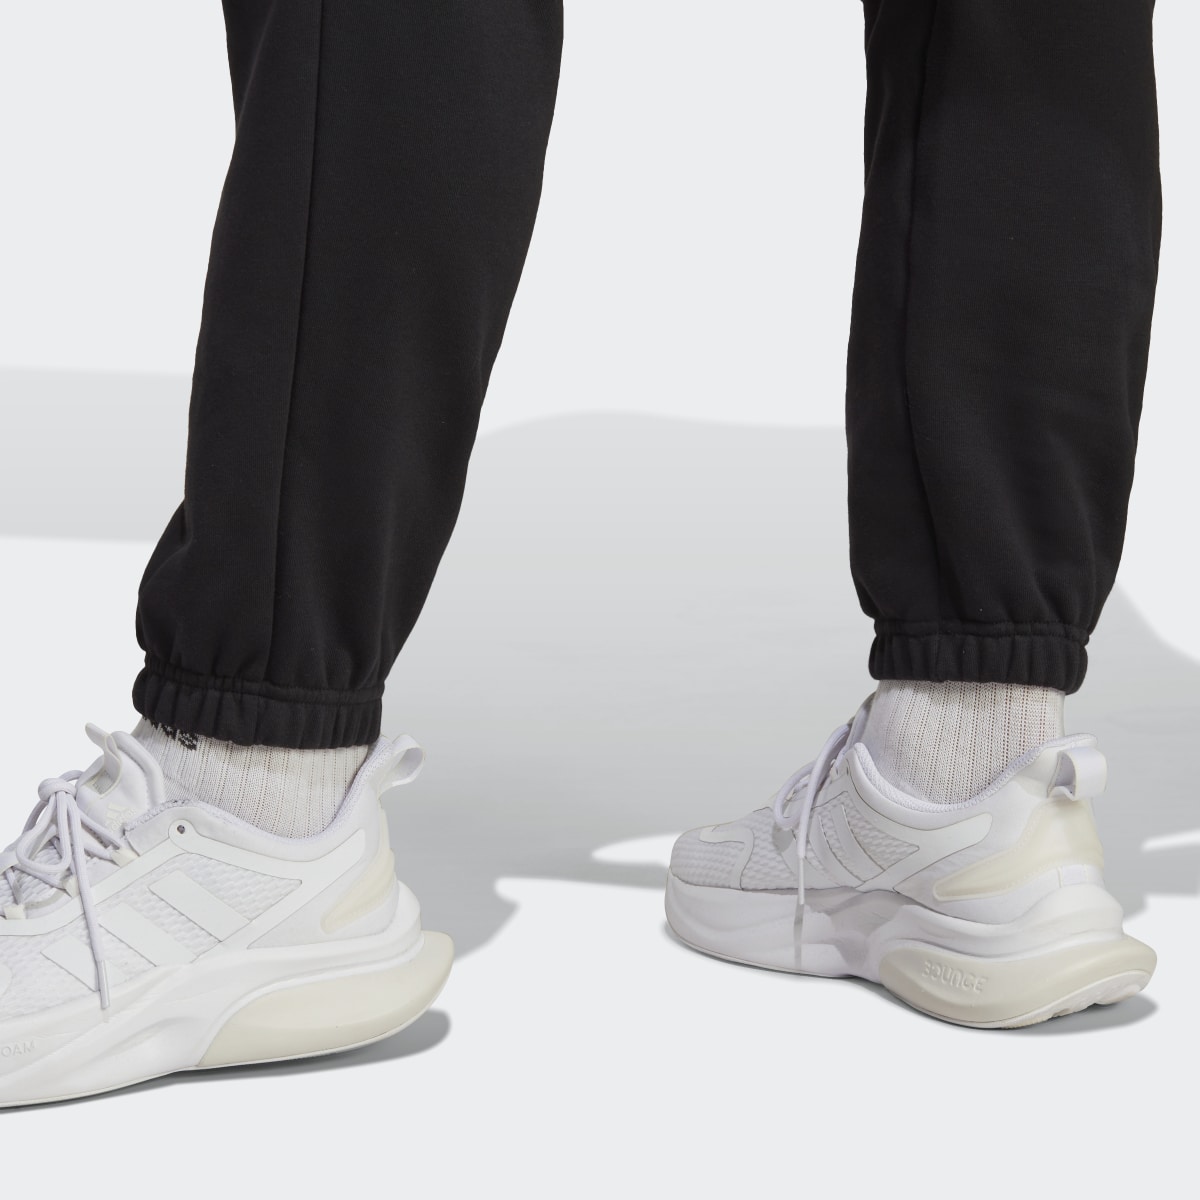 Adidas ALL SZN French Terry Pants. 8